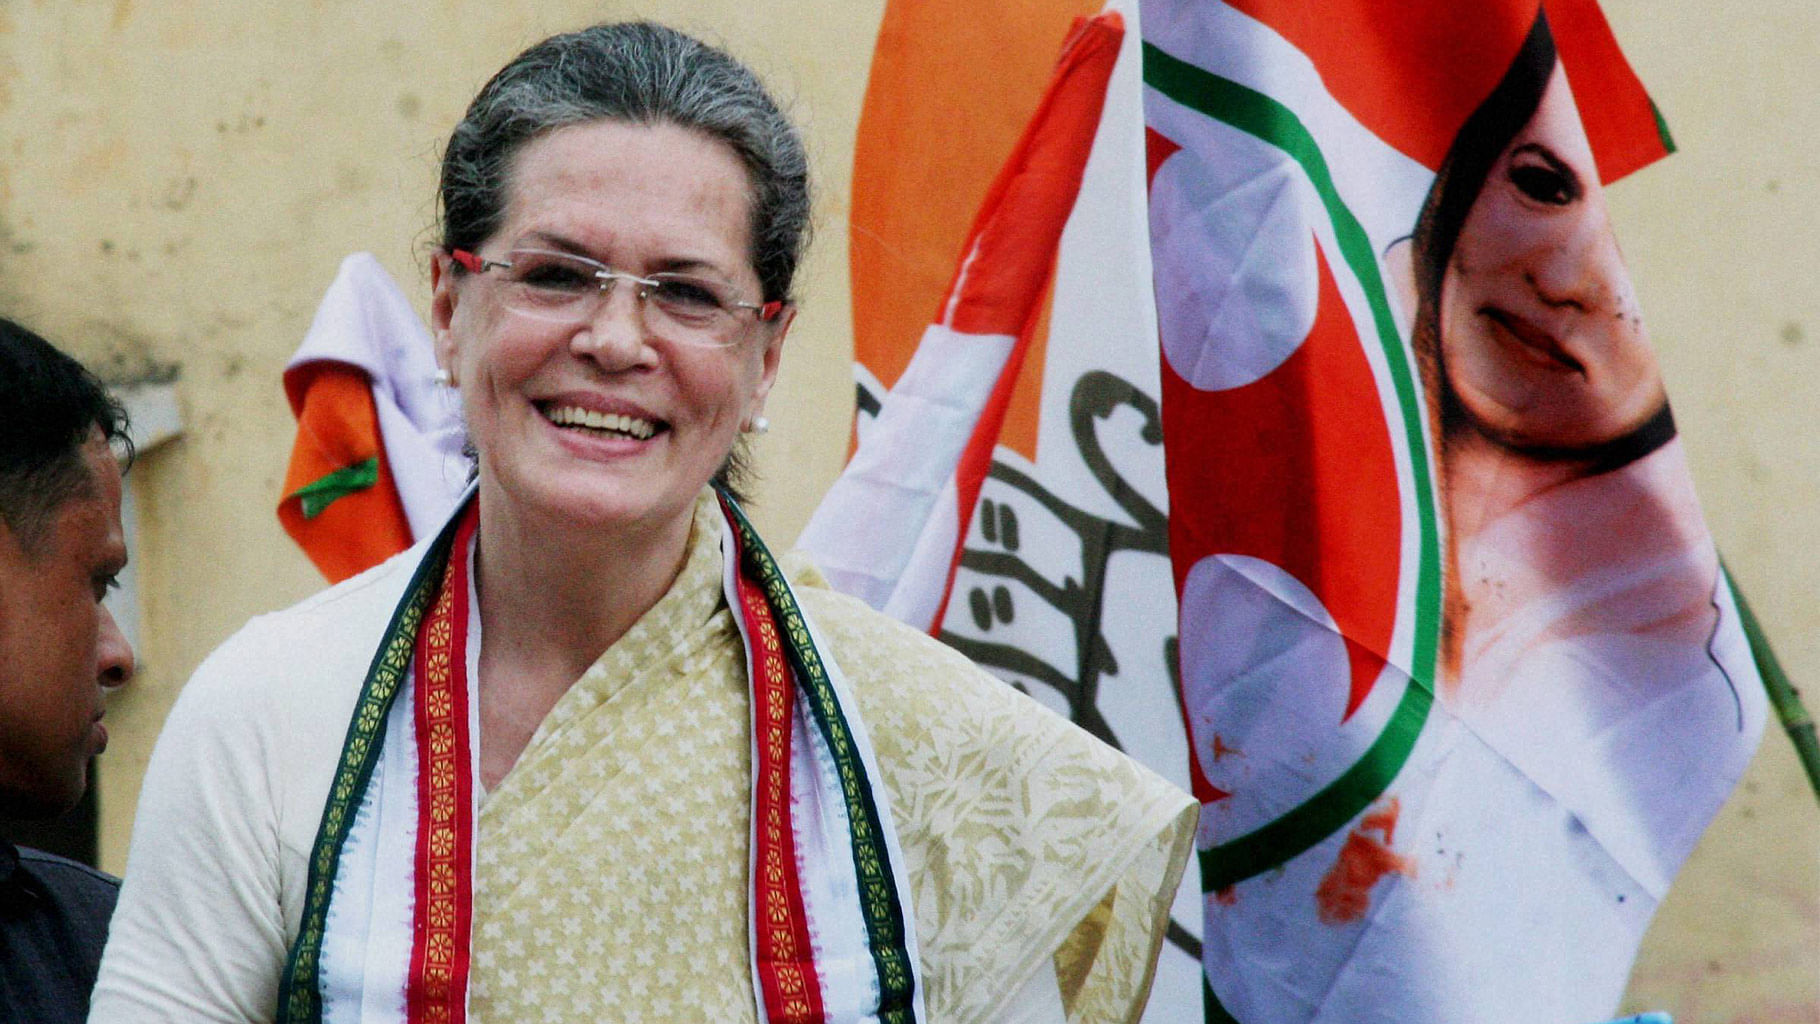 Congress president Sonia Gandhi said the Modi government has seen this remarkable institution as an obstacle to enforcing their majoritarian agenda without being held accountable to people.